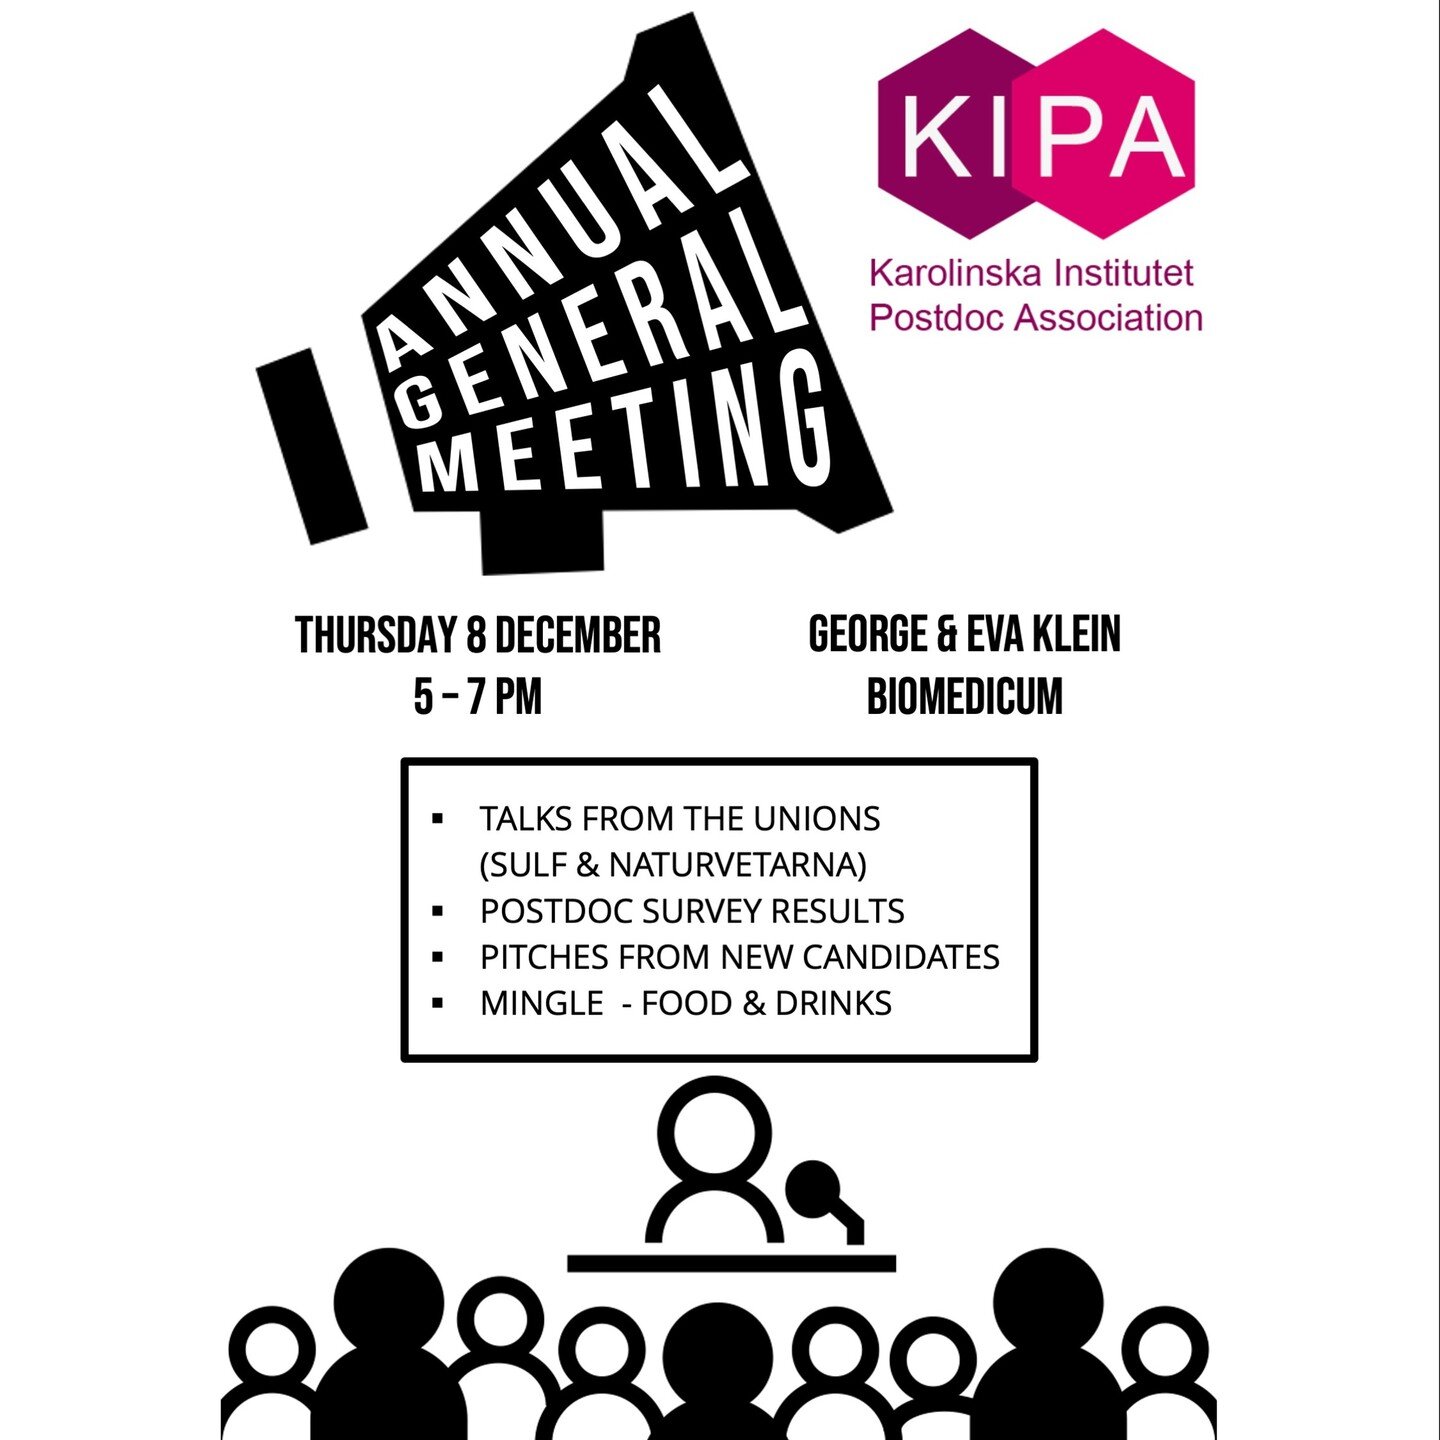 KIPA is looking for new board members in 2023! This is the opportunity to represent the postdocs nationally and internationally. Boost your CV by being part of the KIPA board and keep networking with your peers around KI. Find out more about the role